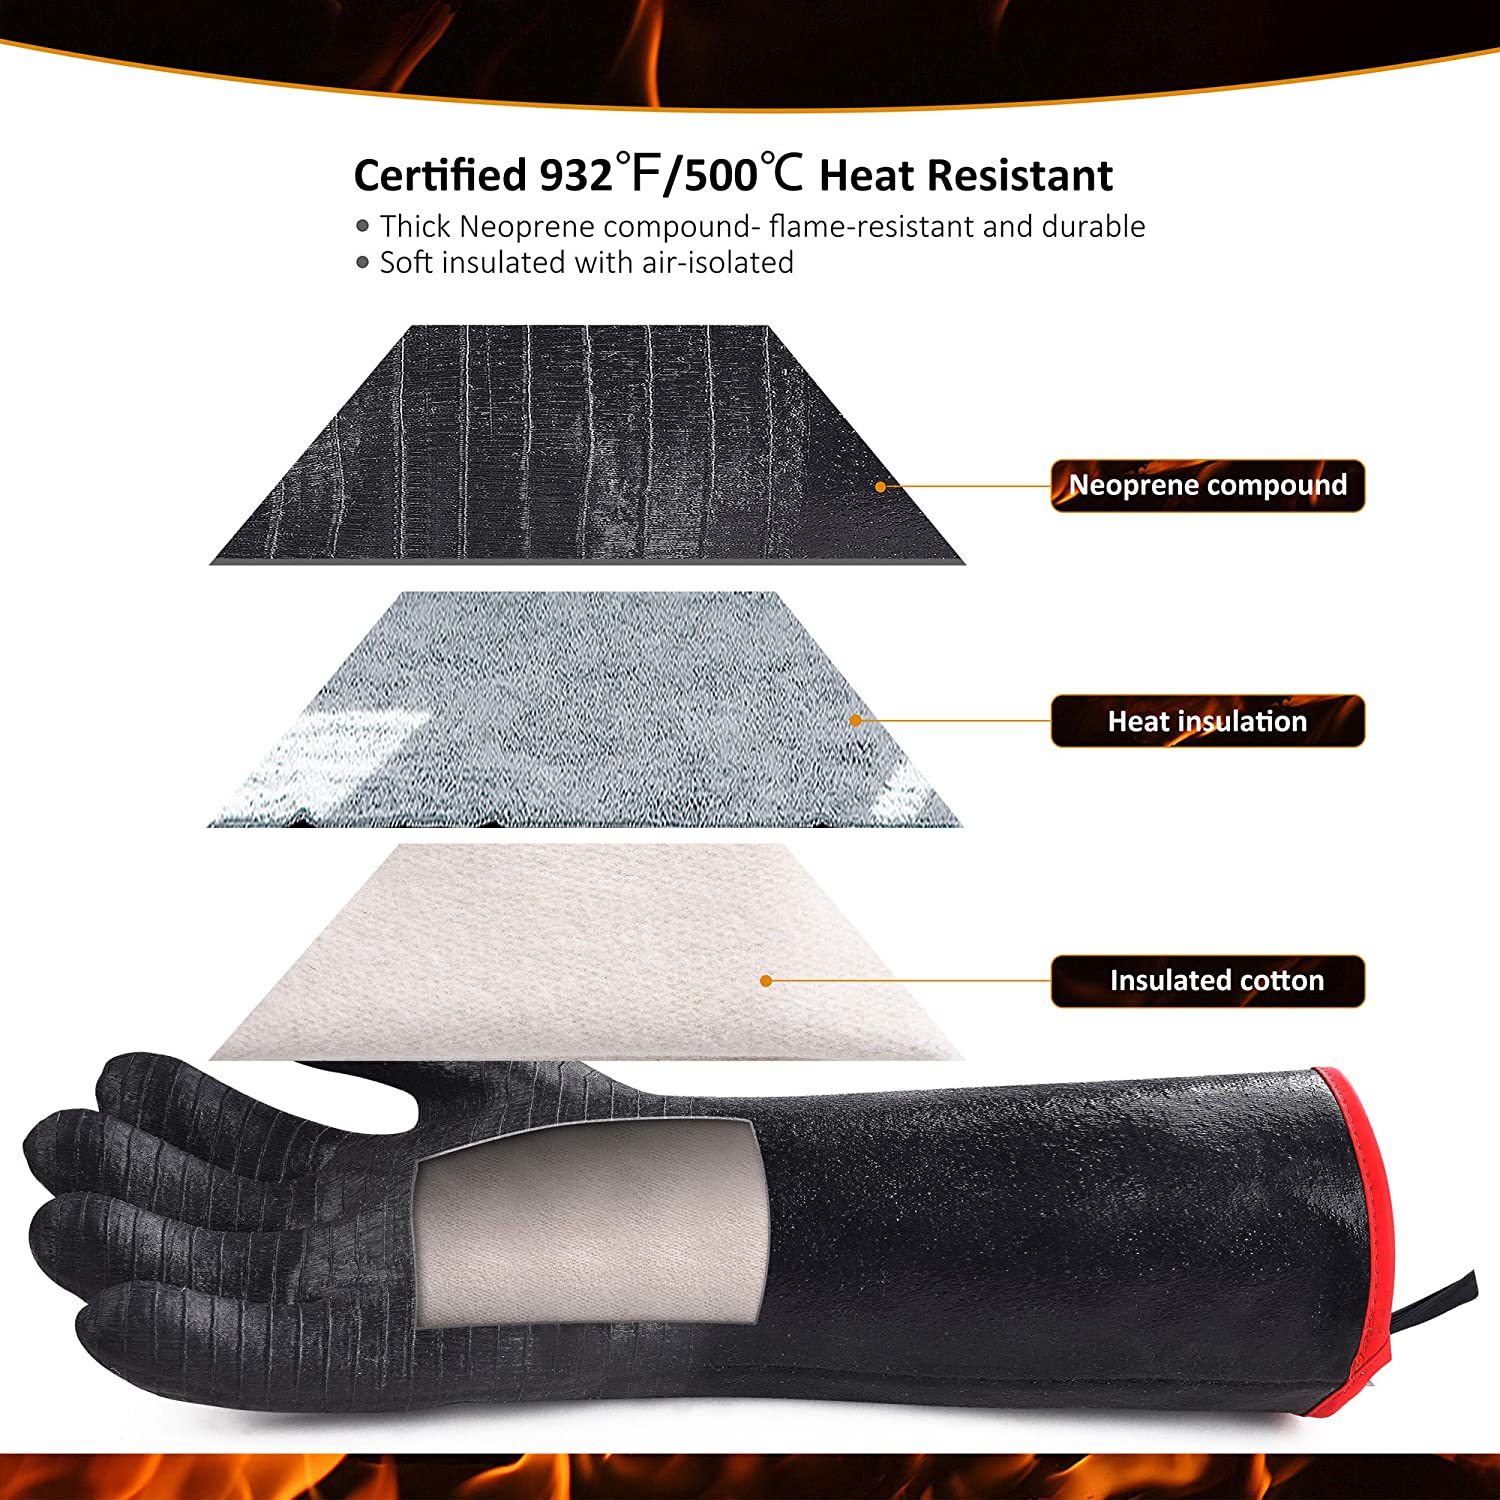 Heat Resistant-Smoker BBQ Gloves 14 Inches,932℉, Grill, Cooking Barbecue Gloves, to Handling Heat Food Right on Your Fryer,Grill,Oven. Waterproof, Fireproof, Oil Resistant Neoprene Coating - image 2 of 7